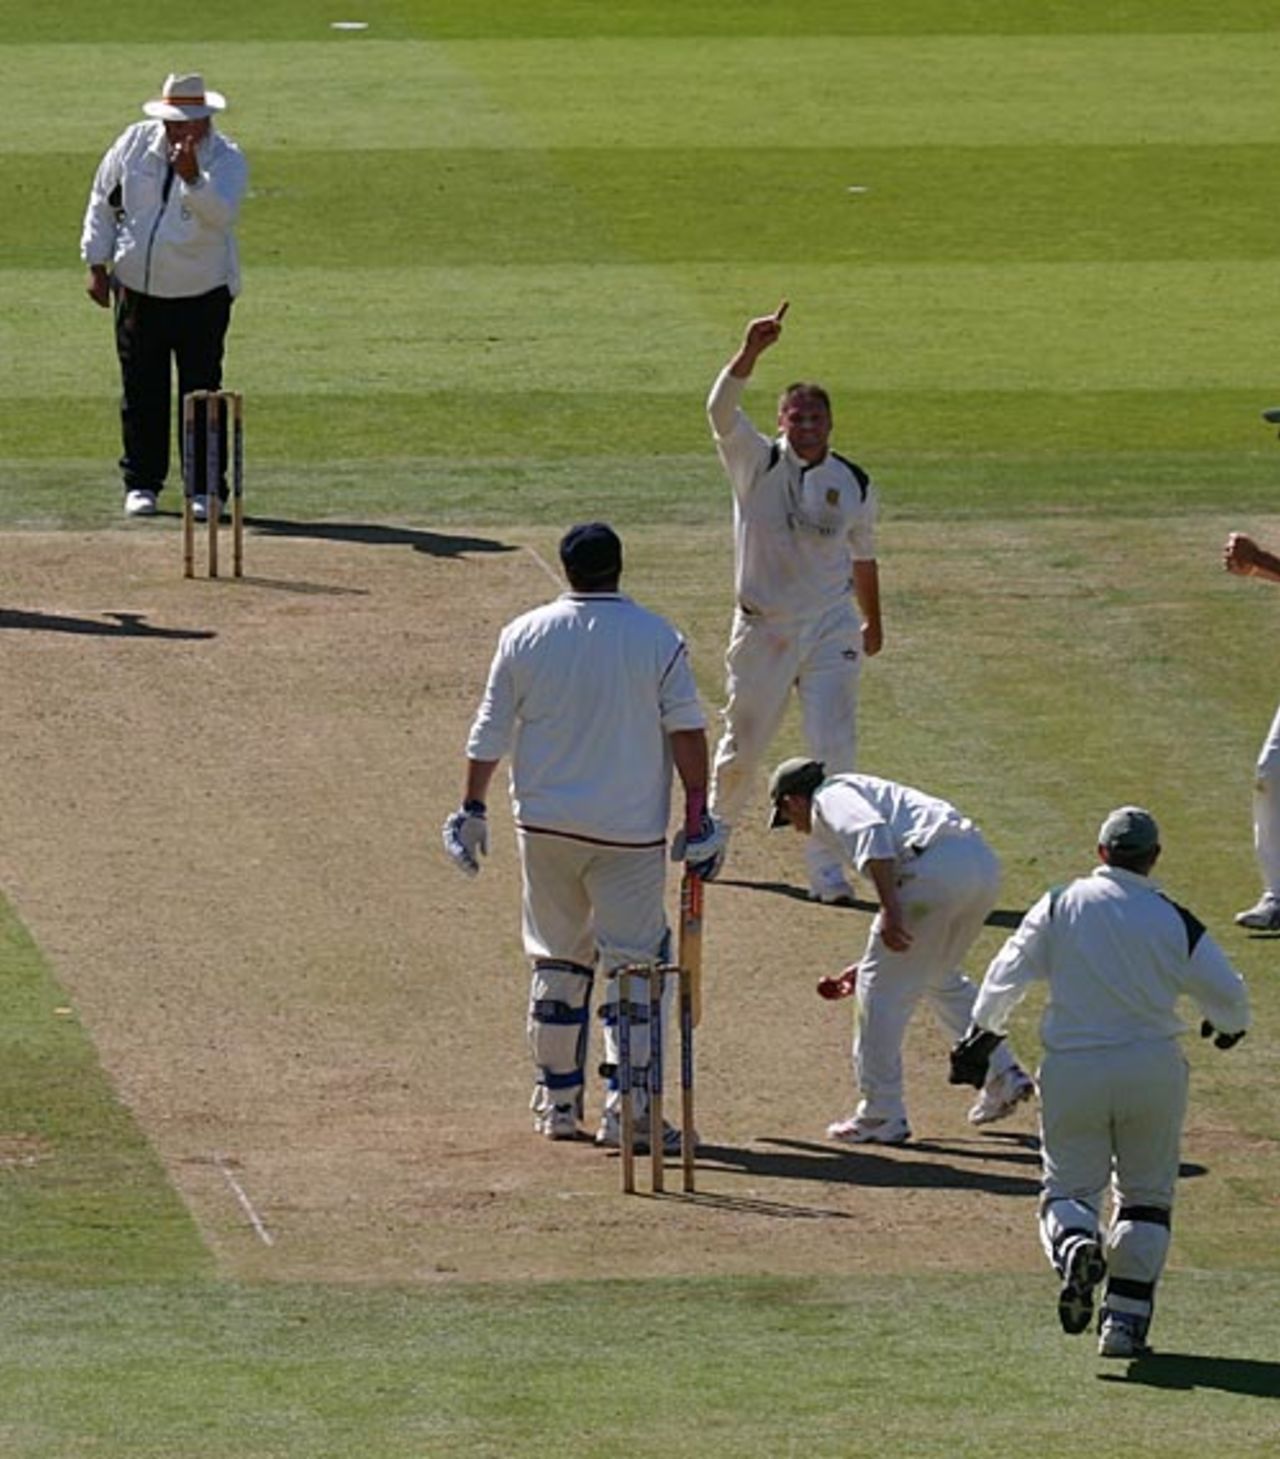 James Watson falls lbw to Simon Renshaw after making a slow 47 from 83 balls, Bromley v Kibworth, Cockspur Cup final, Lord's, September 11, 2007